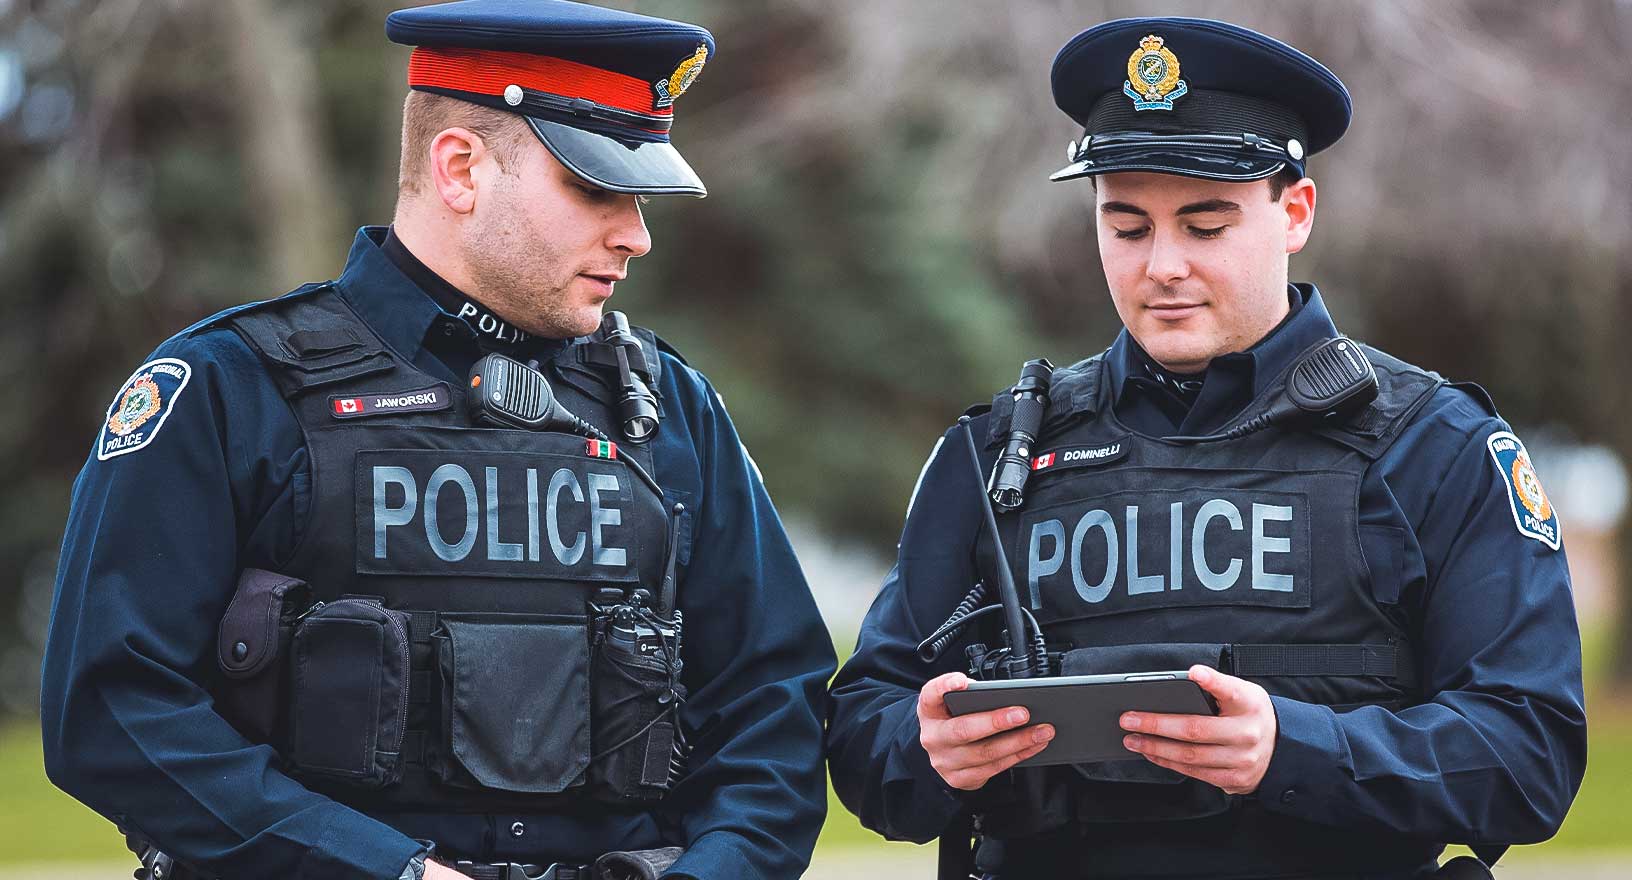 Police force uses a law enforcement records management system to receive and review information